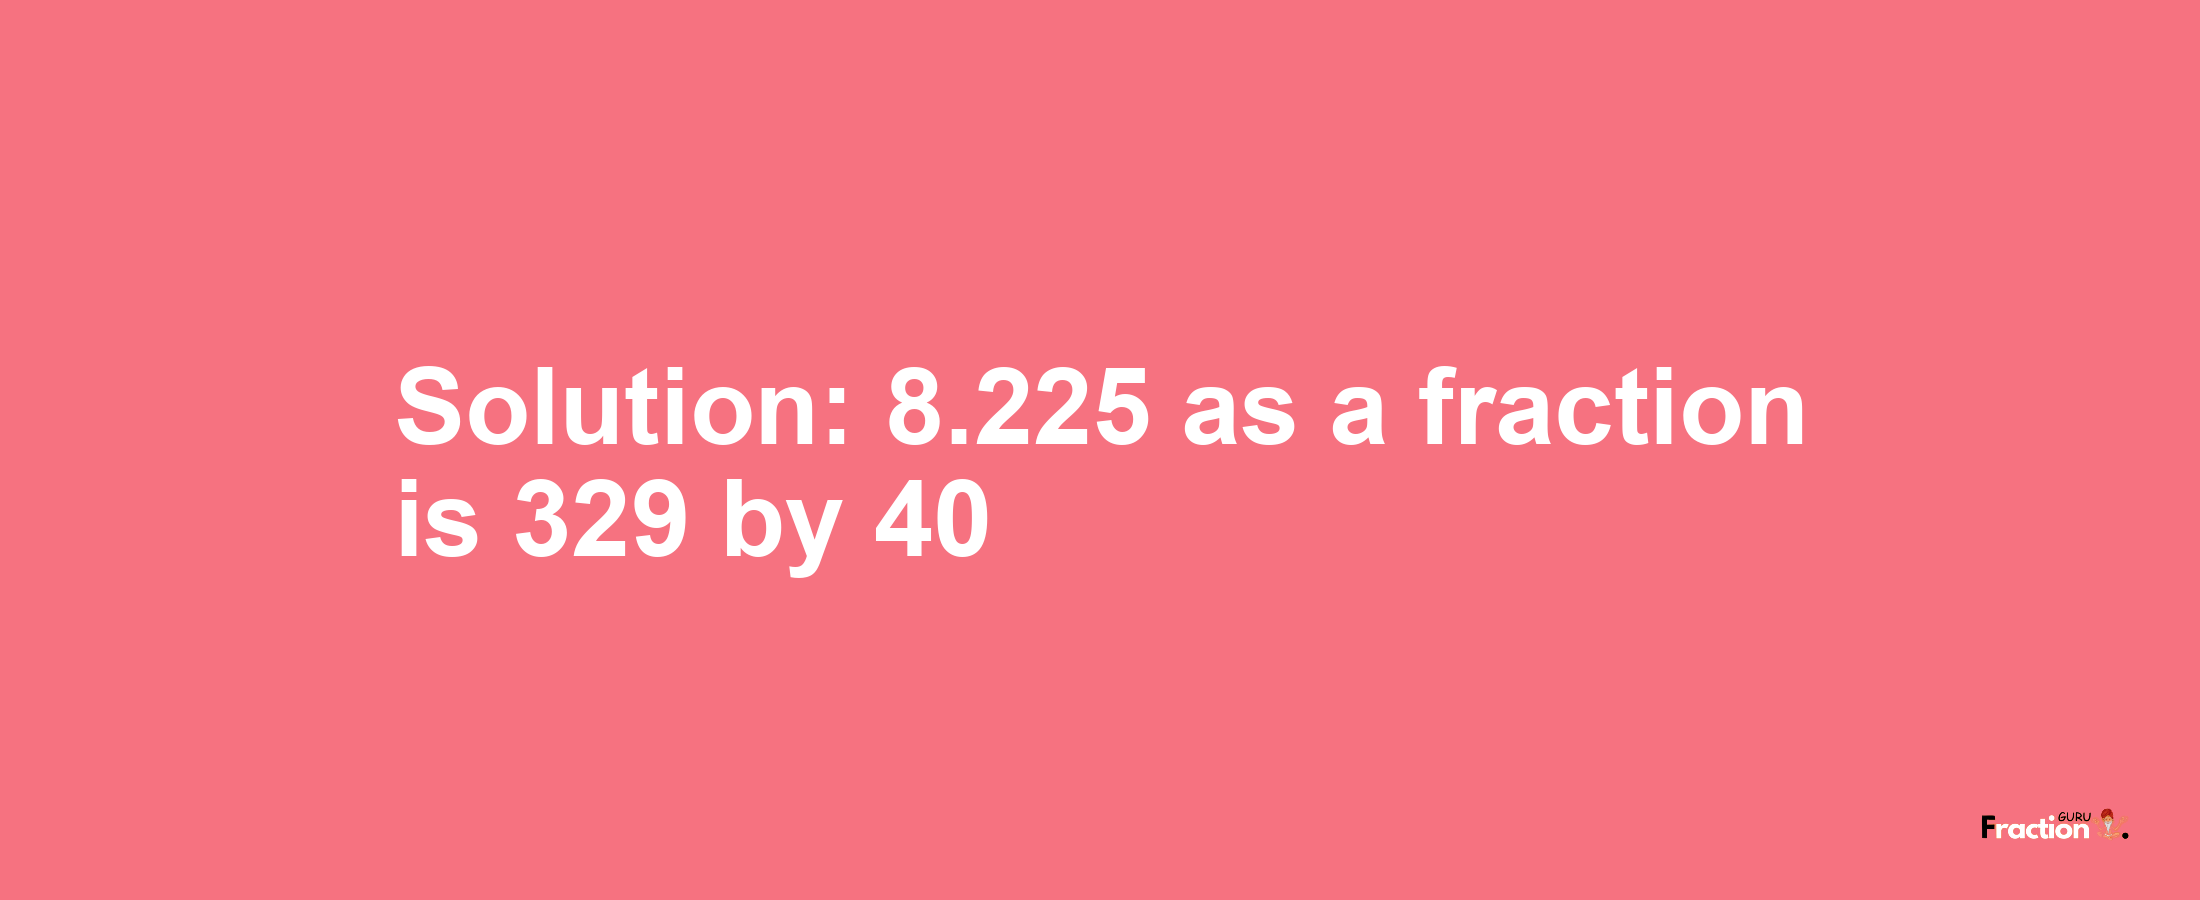 Solution:8.225 as a fraction is 329/40